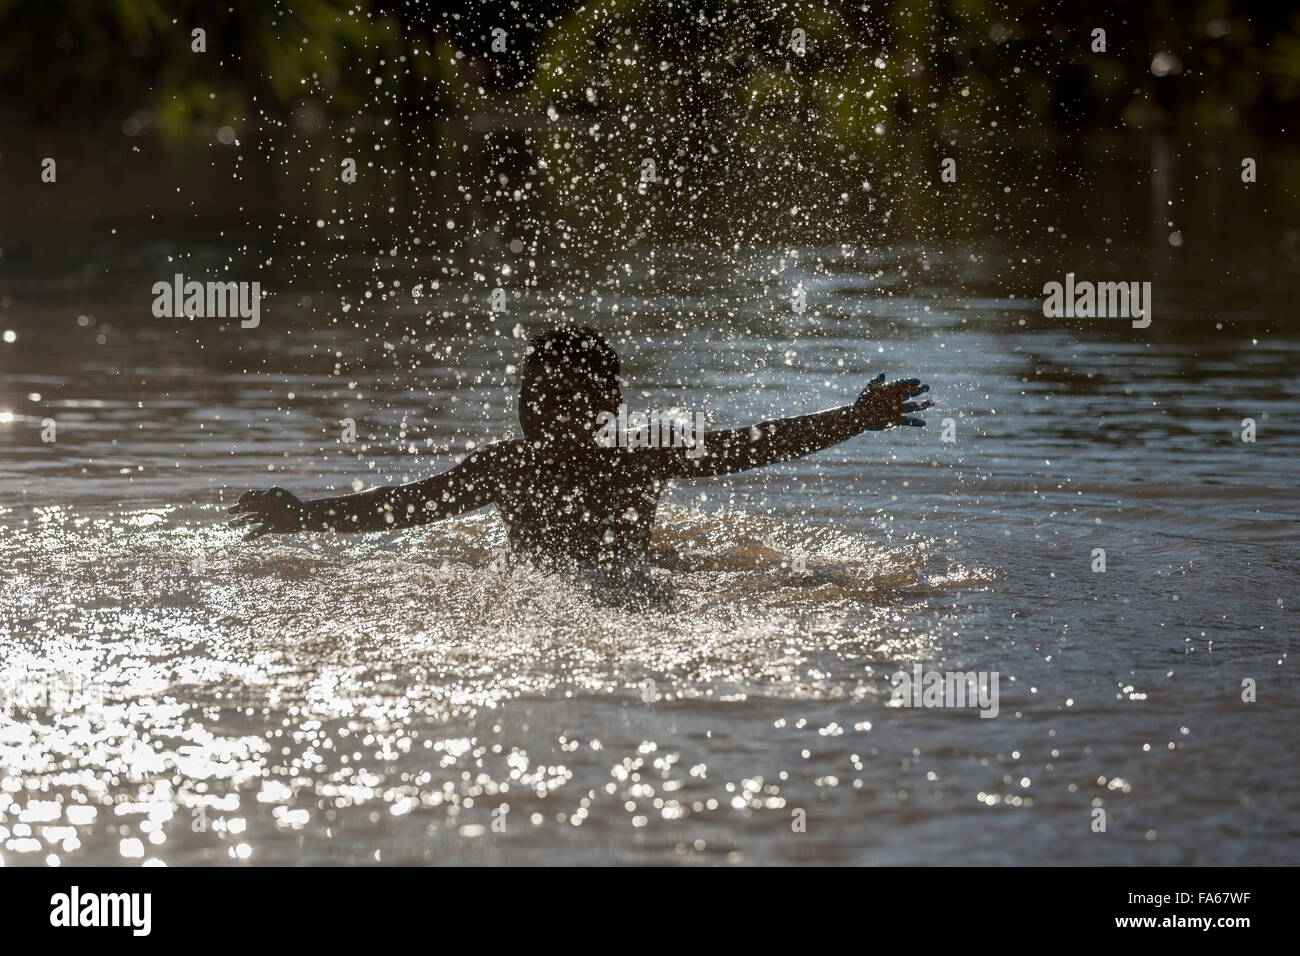 Silhouette of a boy splashing in the river, Thailand Stock Photo